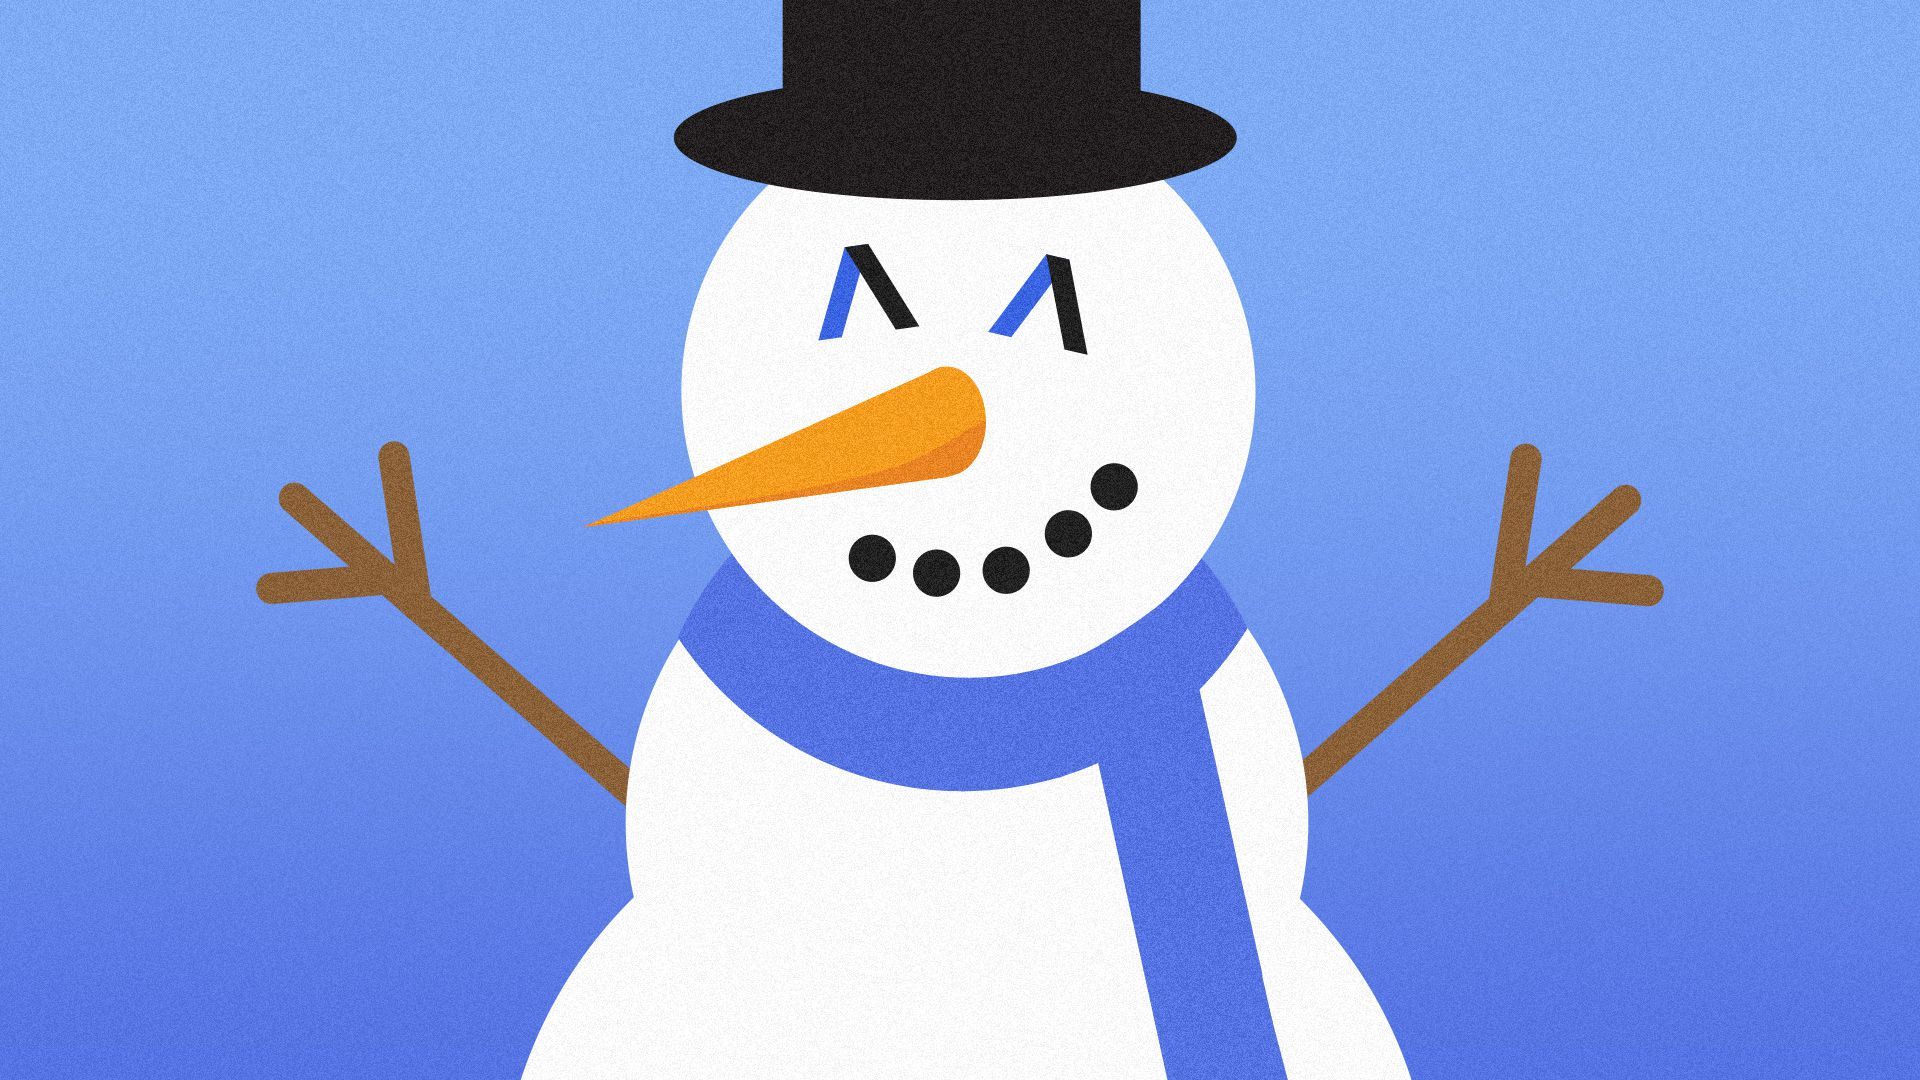 Illustration of a snowman with Axios logos for eyes.